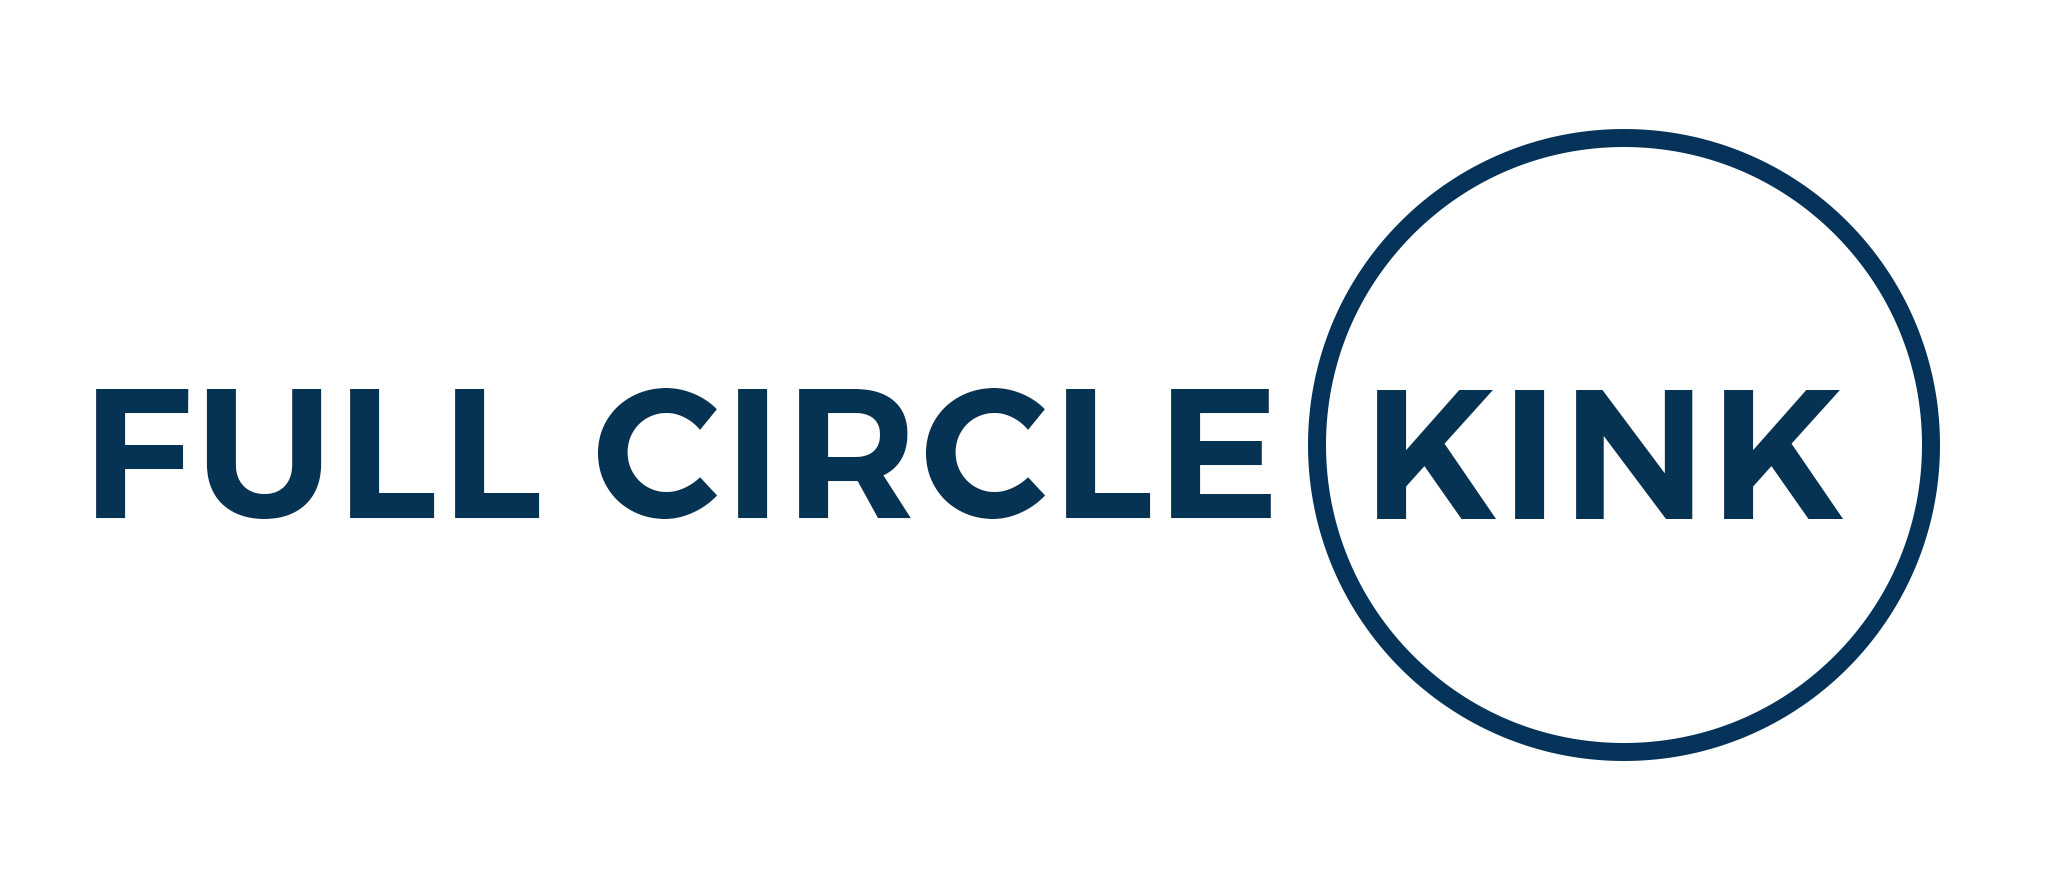 The words FULL CIRCLE in blue on a white background followed by the word KINK in blue surrounded by a blue circle.